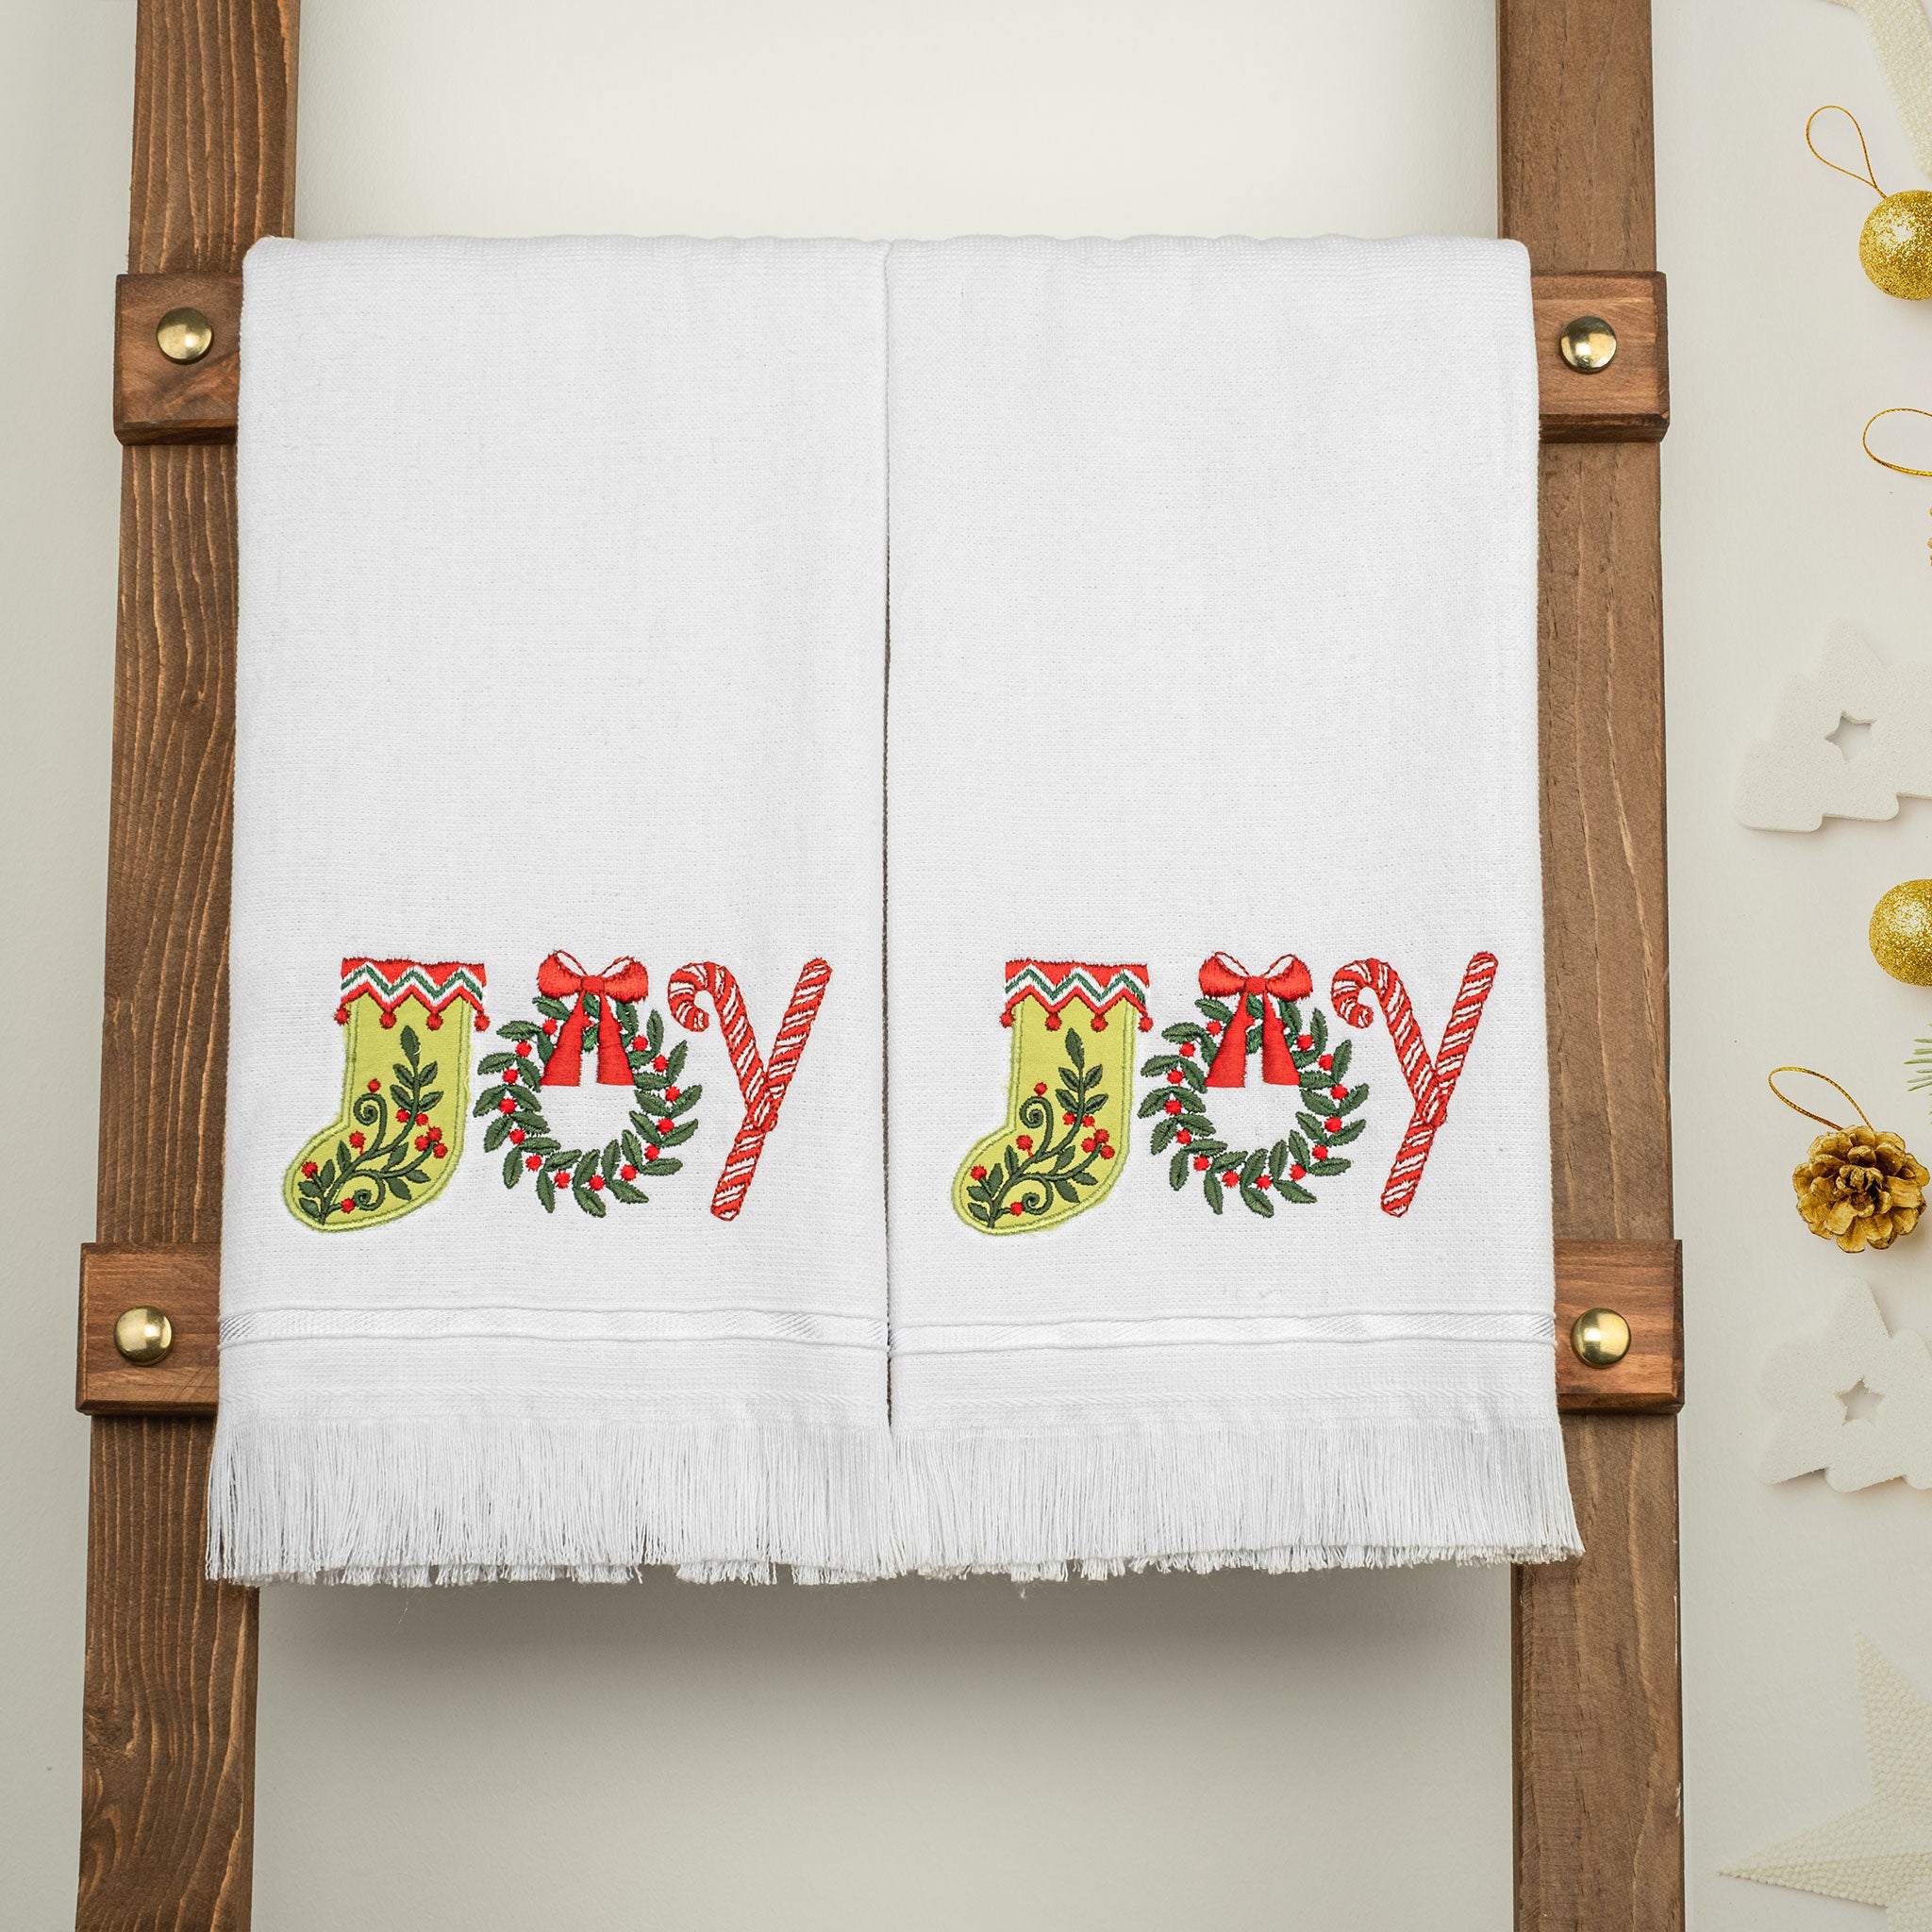  American Soft Linen - Christmas Towels Set 2 Packed Embroidered Turkish Cotton Hand Towels - Joy Lettering - 5